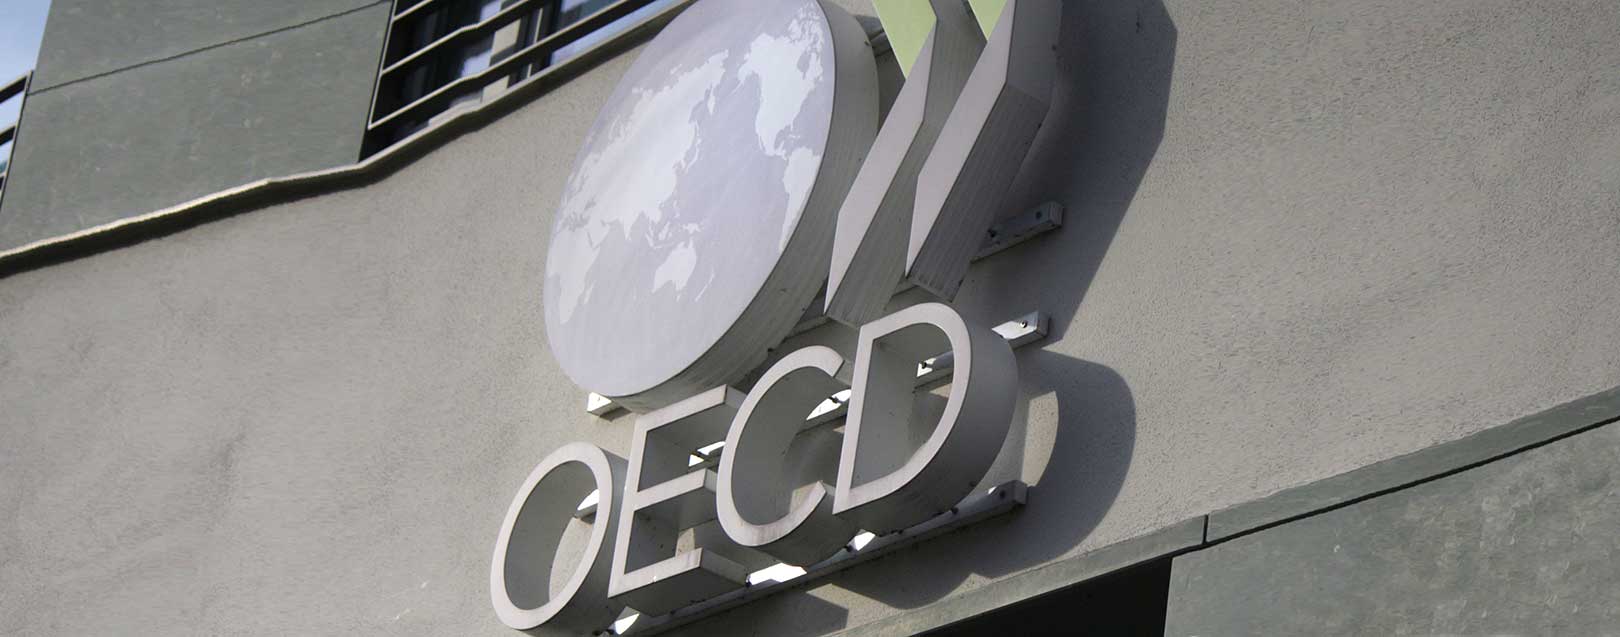 India’s growth rate expected to be near 7.5%: OECD